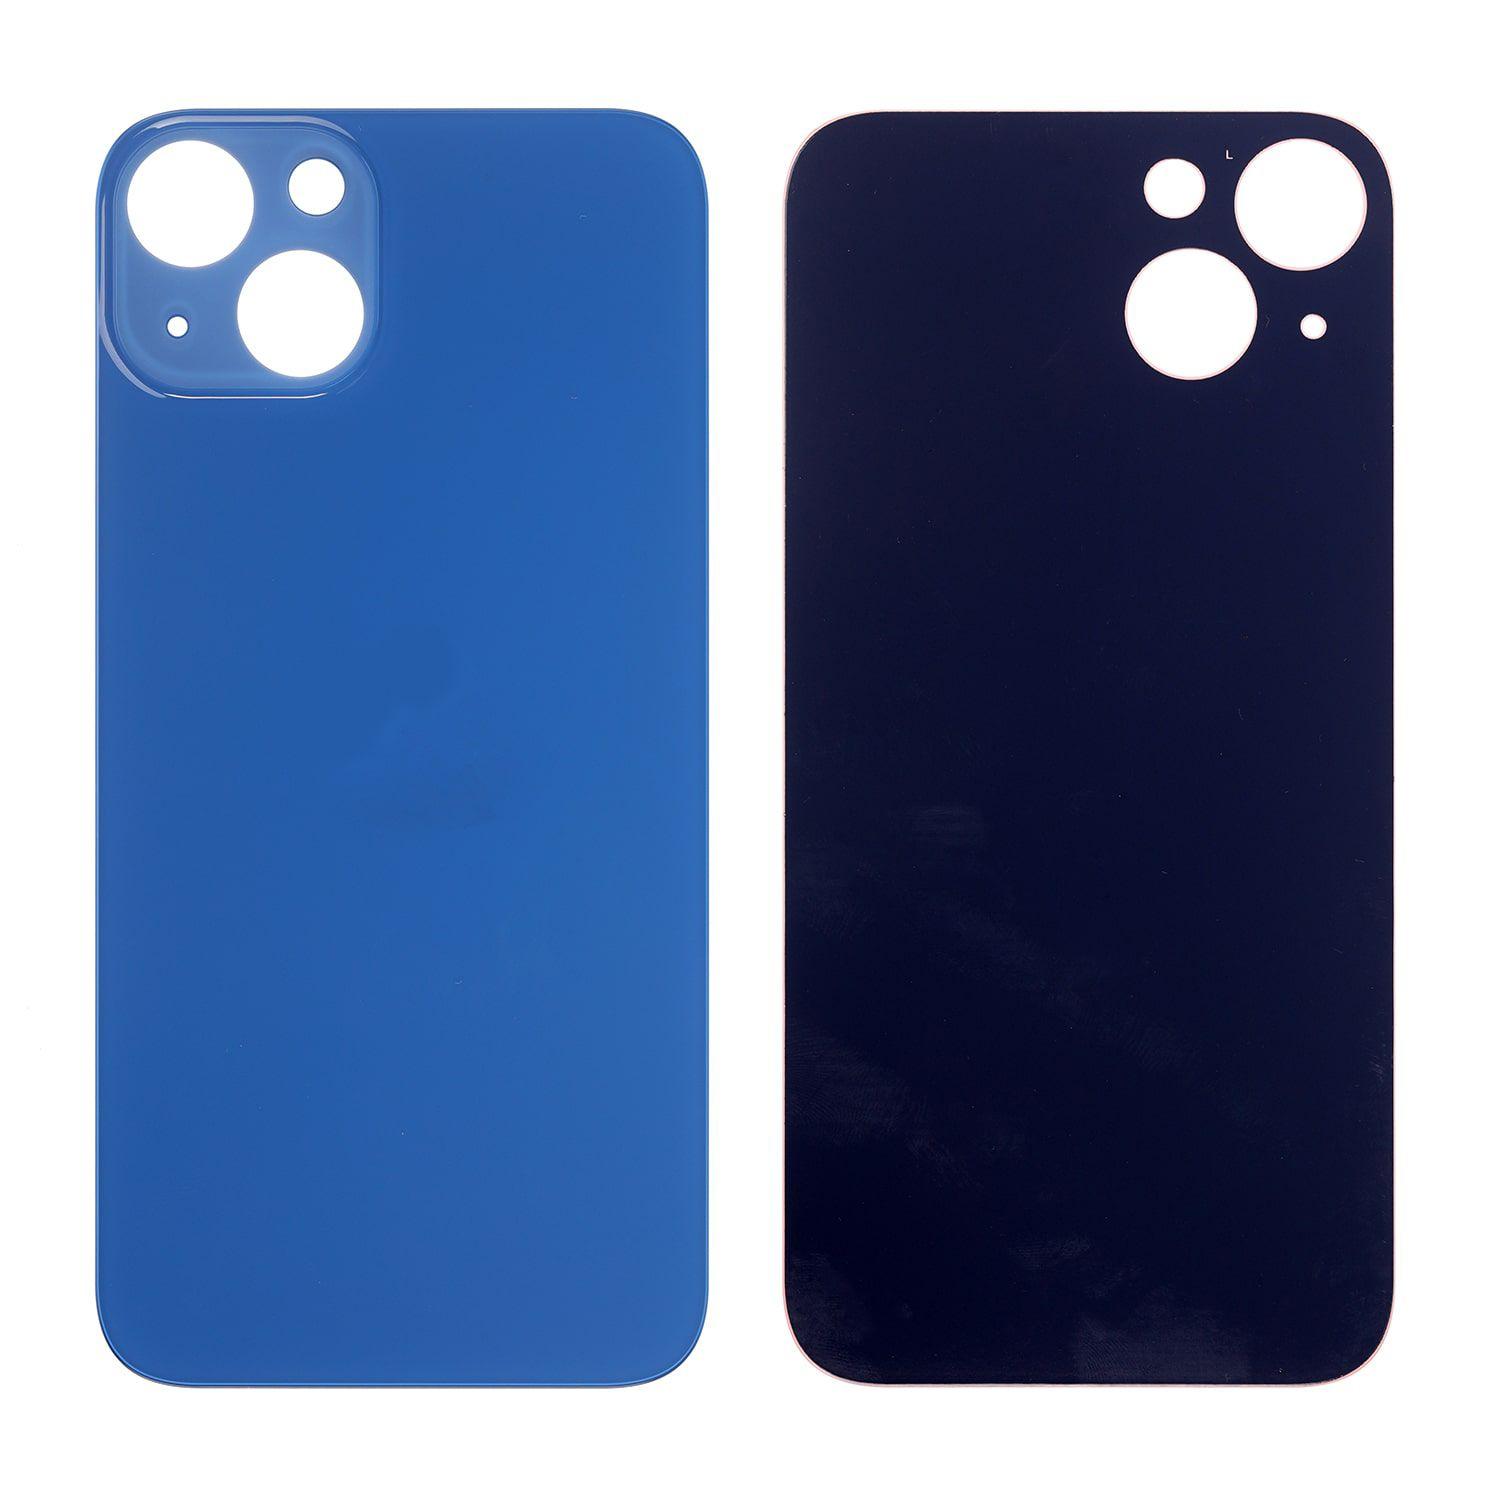 Battery cover iPhone 13 with bigger hole for camera glass - blue